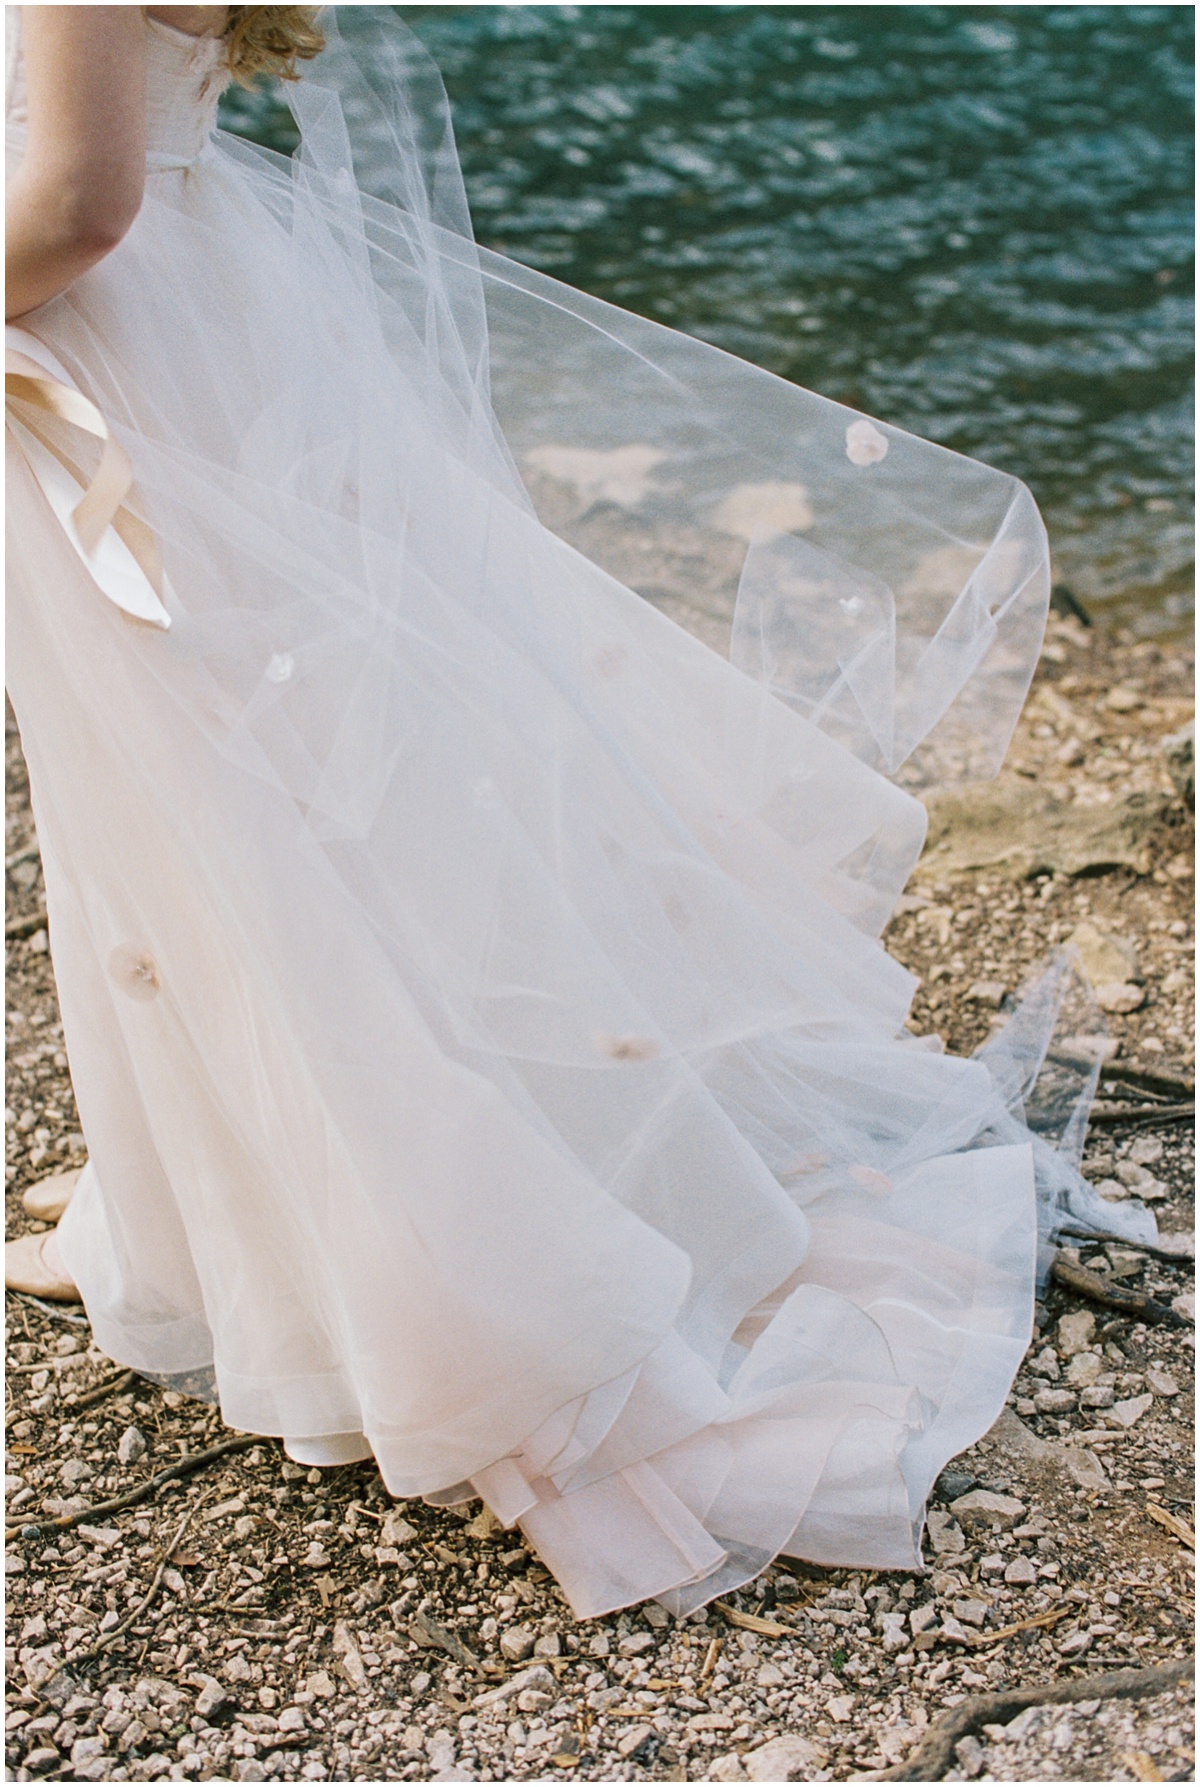 Abigail_Malone_Film_Wedding_Photography_KNoxville_TN_Blush_Dress_Outdoor_Windy_Pink_and_Green_Wedding_0010.jpg